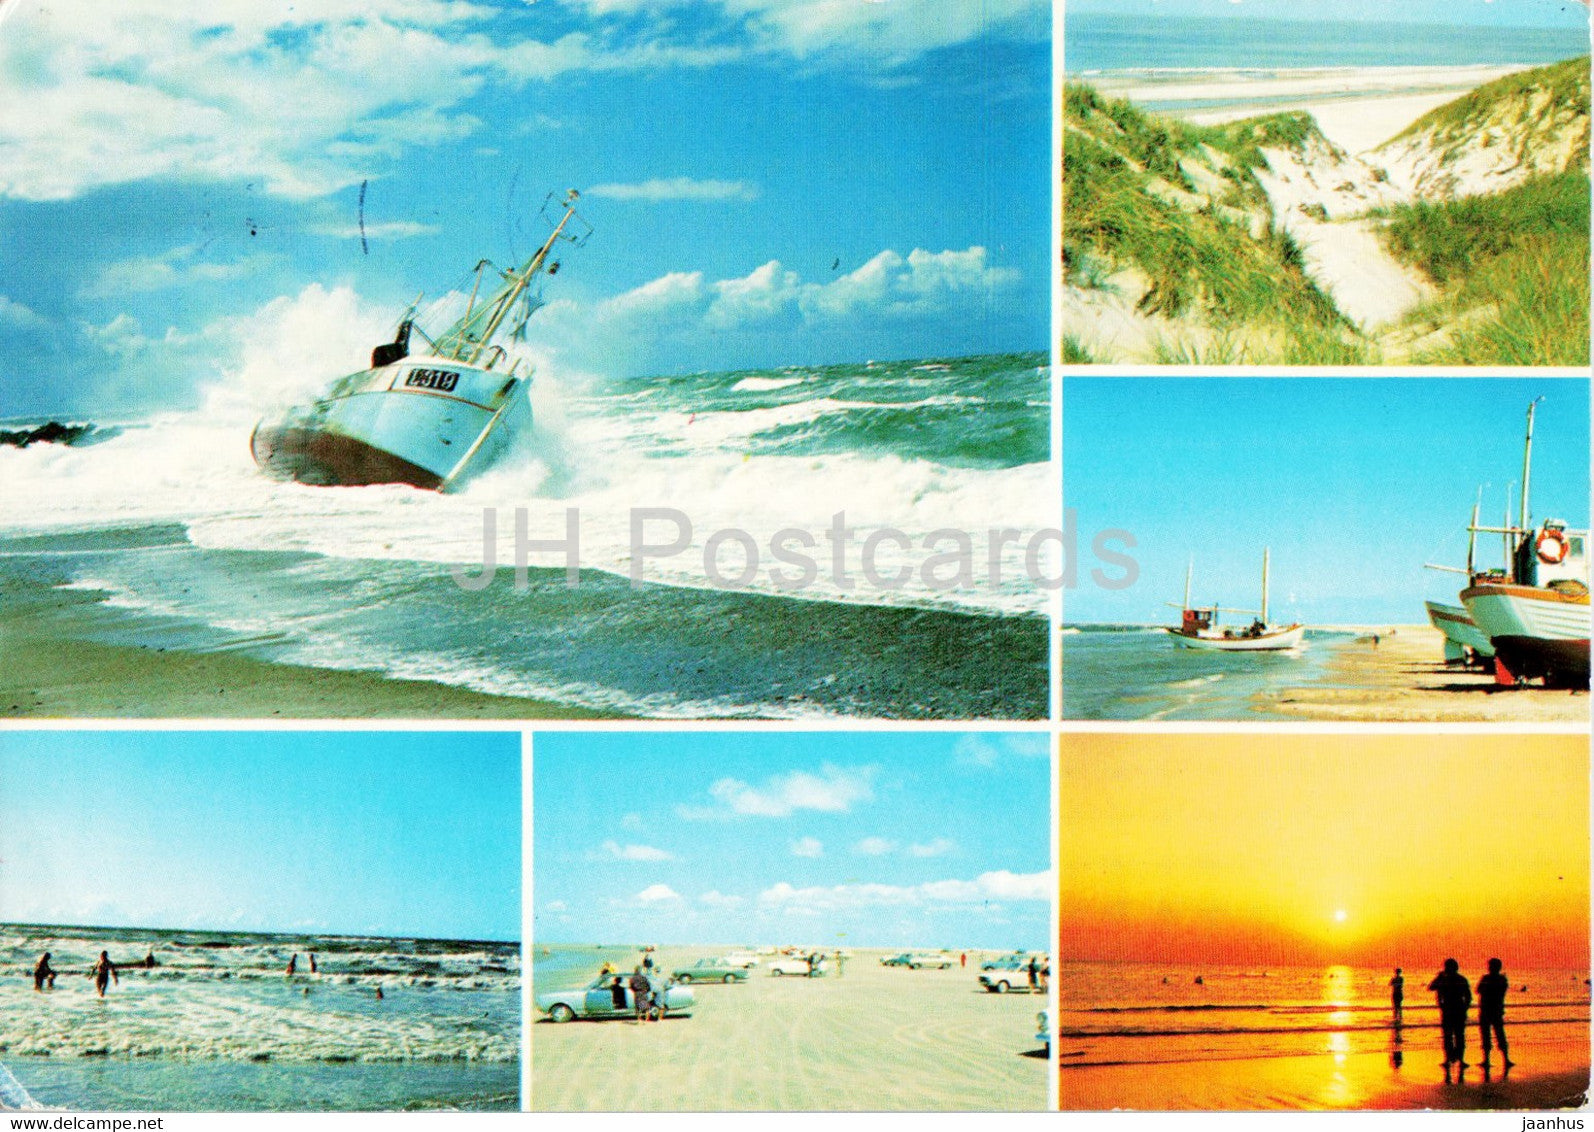 The North Sea - ship - boat - beach - multiview - Denmark - used - JH Postcards